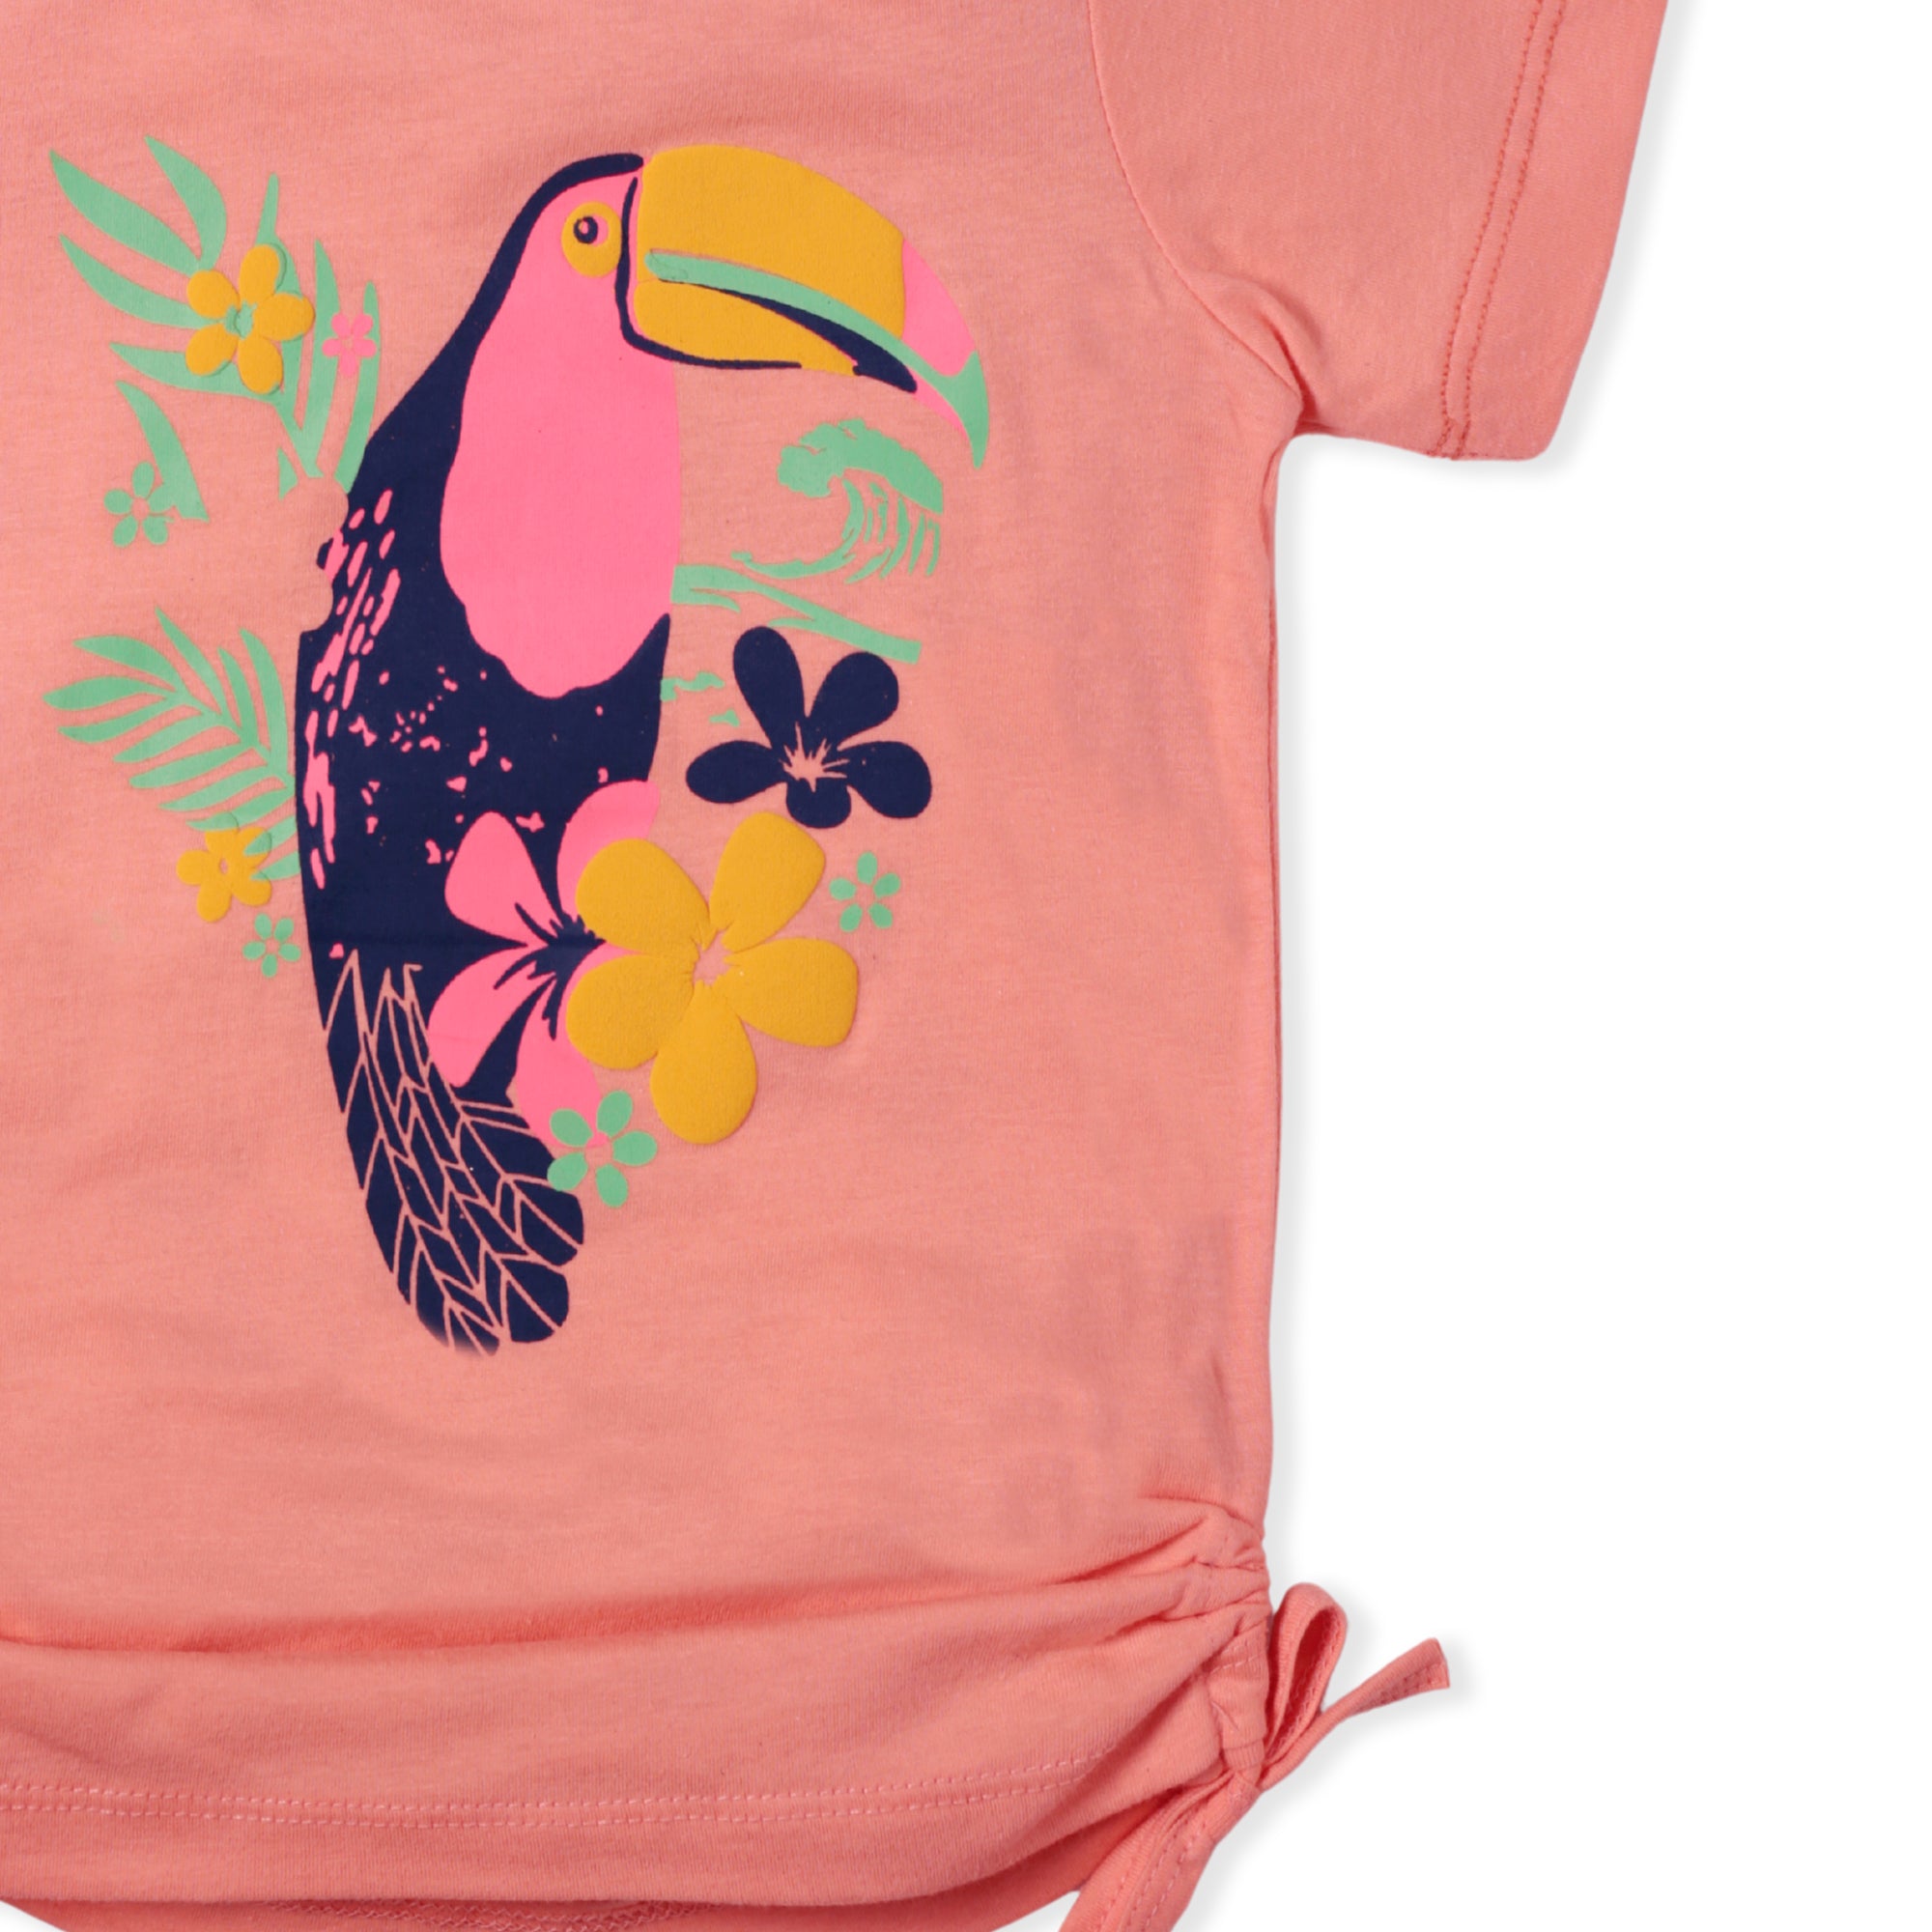 GIRLS PARROT GRAPHIC TEE-004899-PCH